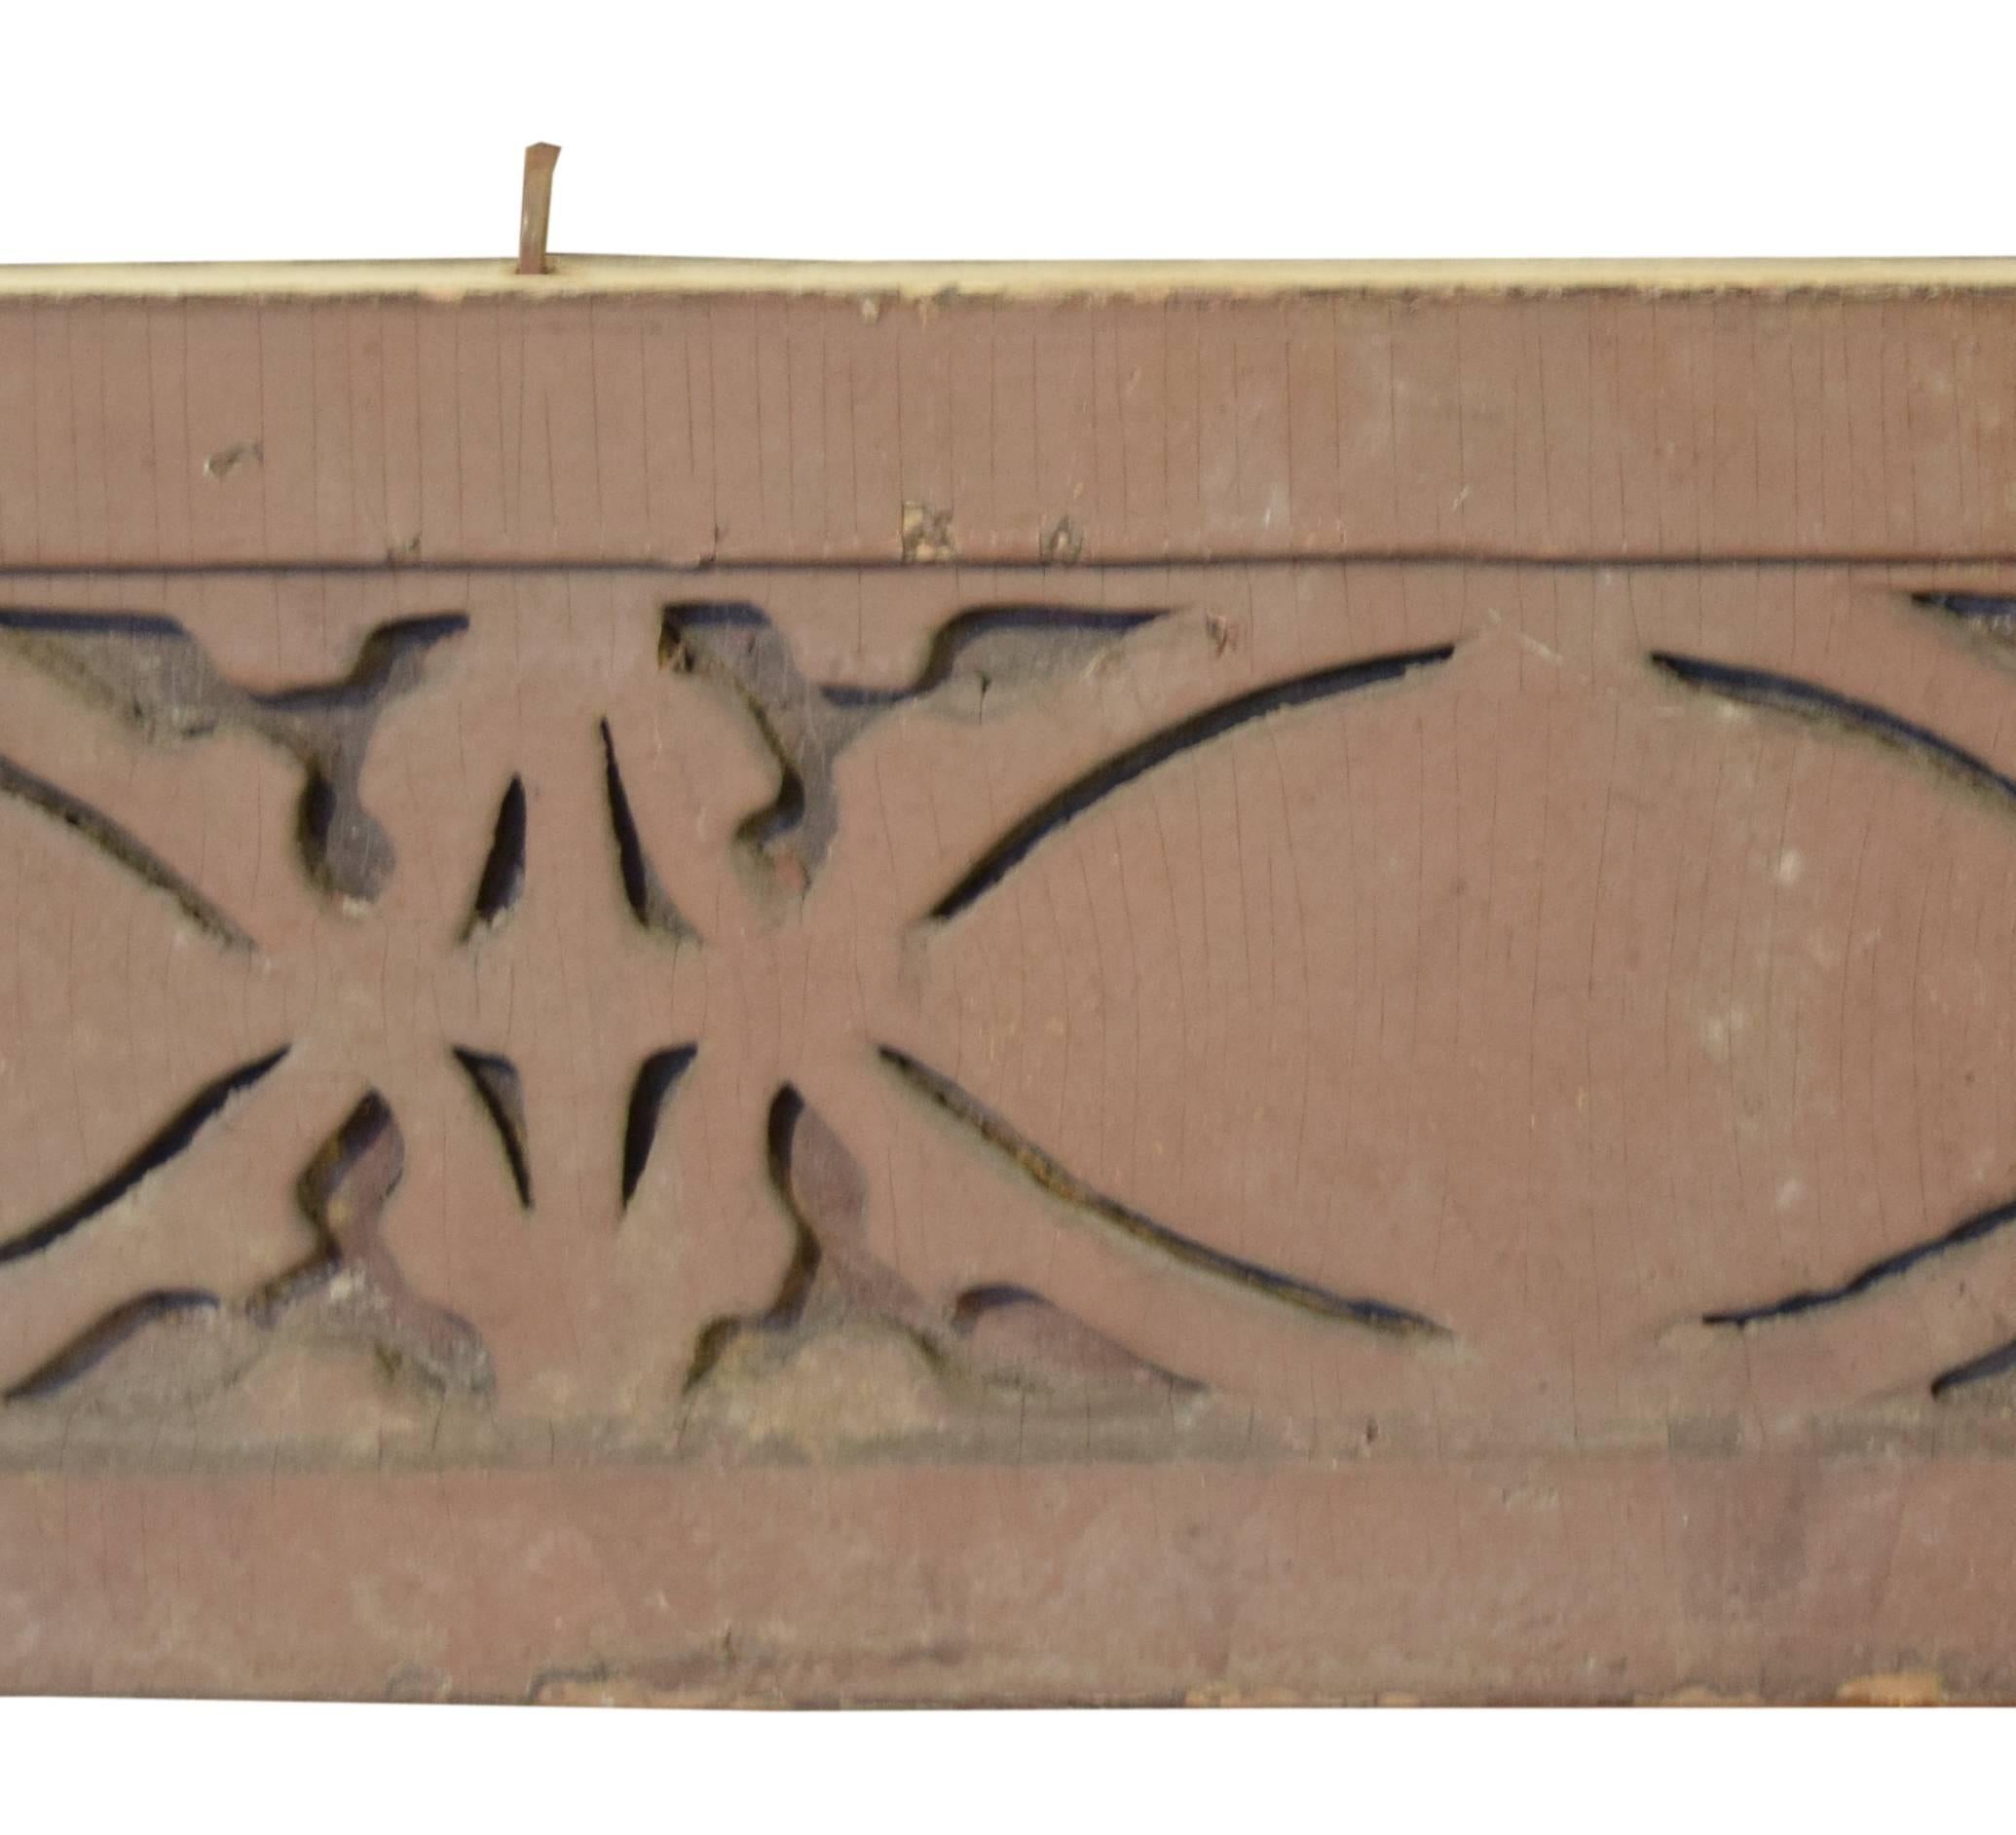 Rare Louis Sullivan designed painted pine panel from the James Charnley House, 1892, Chicago, Illinois, by Adler and Sullivan with Frank Lloyd Wright. The home, in Chicago's Gold Coast neighborhood, is now a museum and has been a registered historic